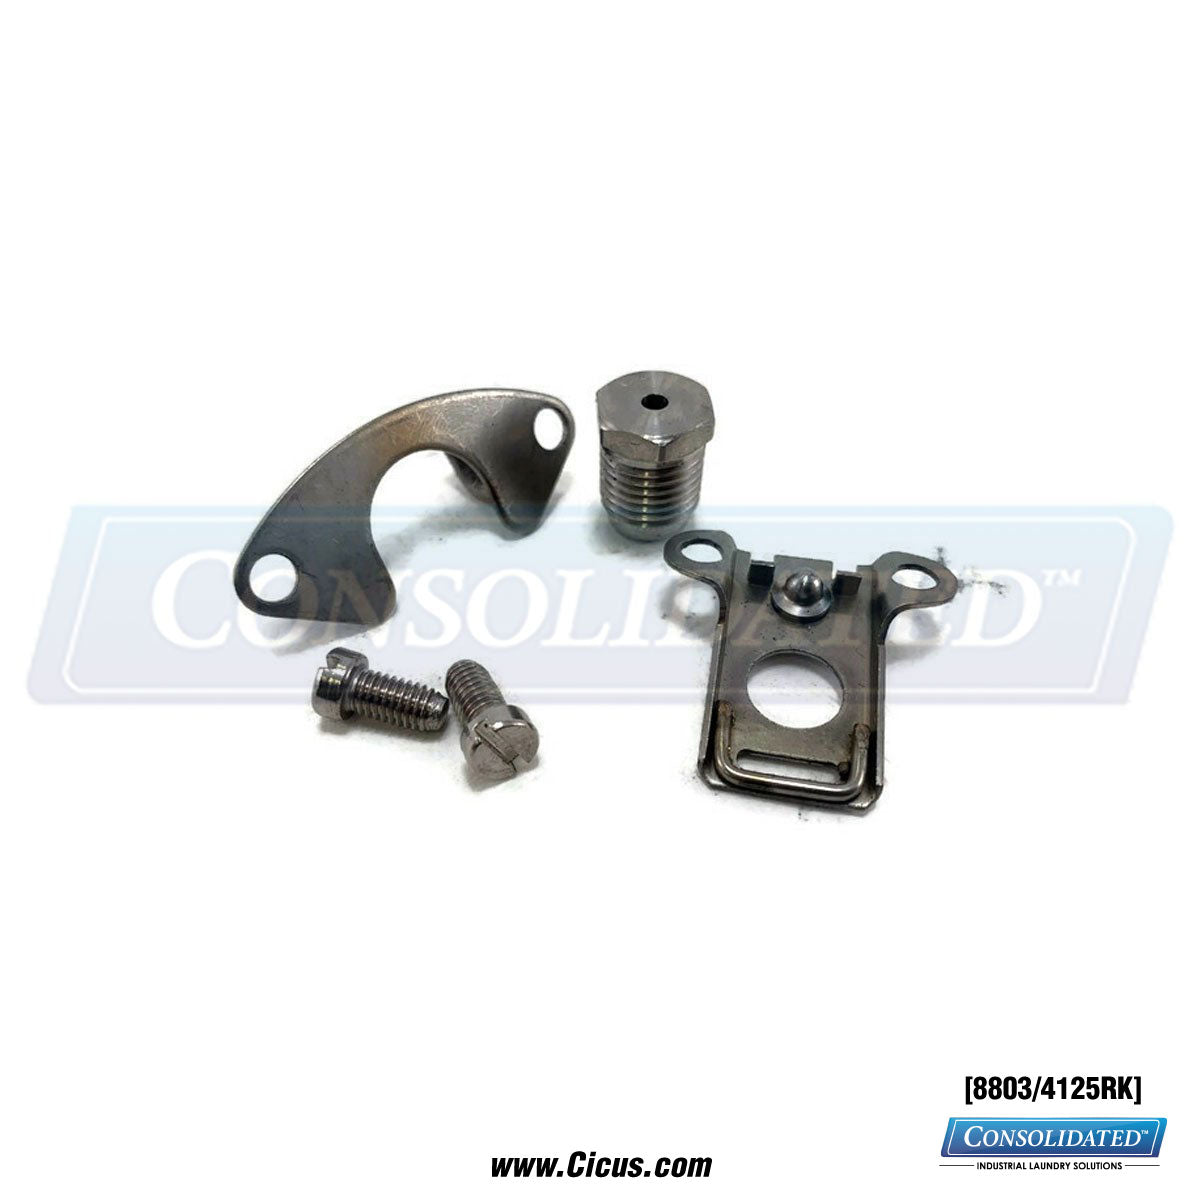 Armstrong 3/4" Steam Trap -125 PSI Repair Kit [8803/4125RK]  - Front View